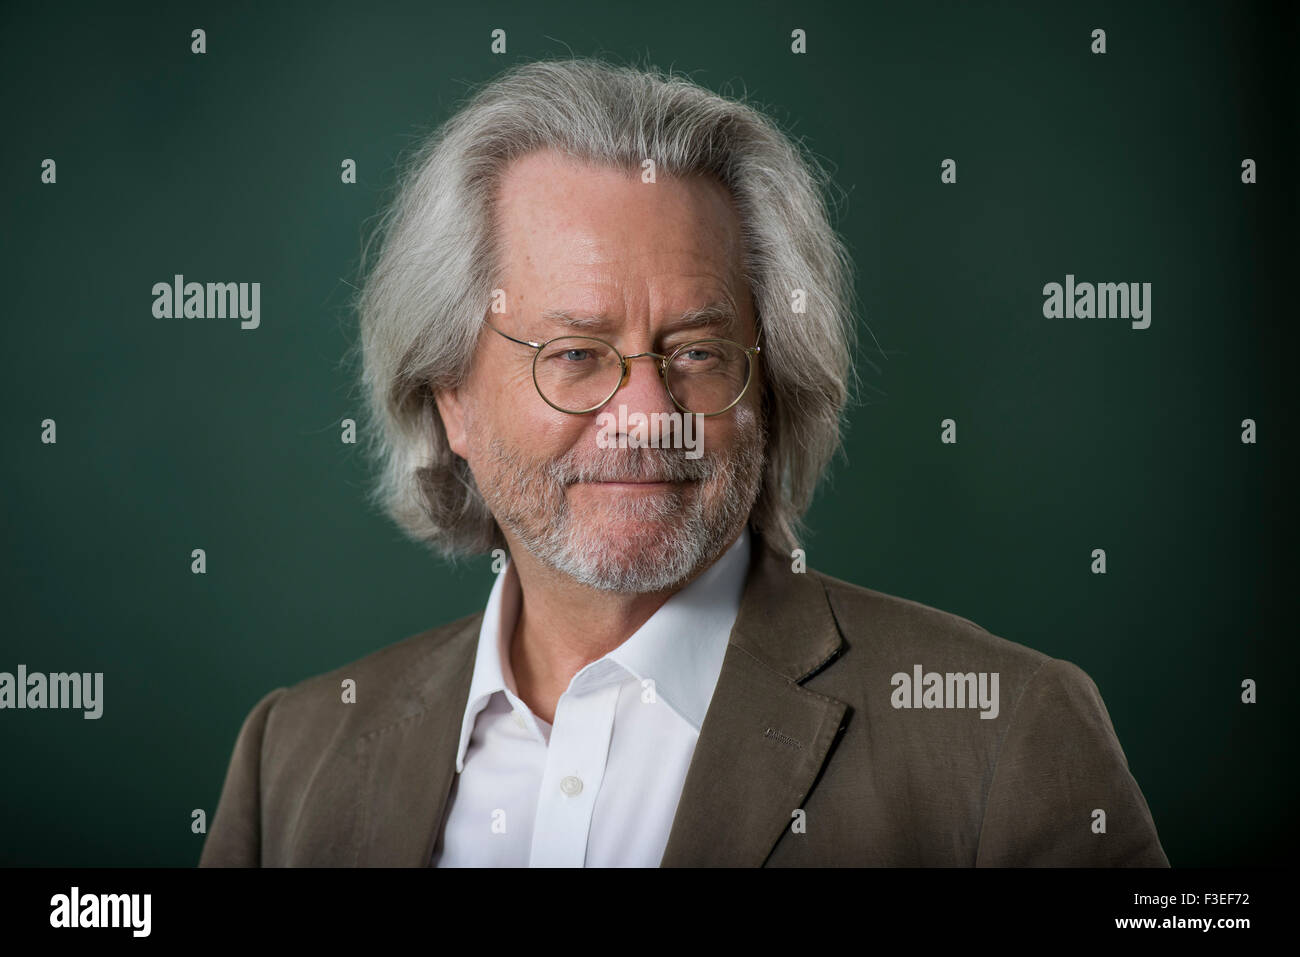 A C Grayling High Resolution Stock Photography and Images - Alamy